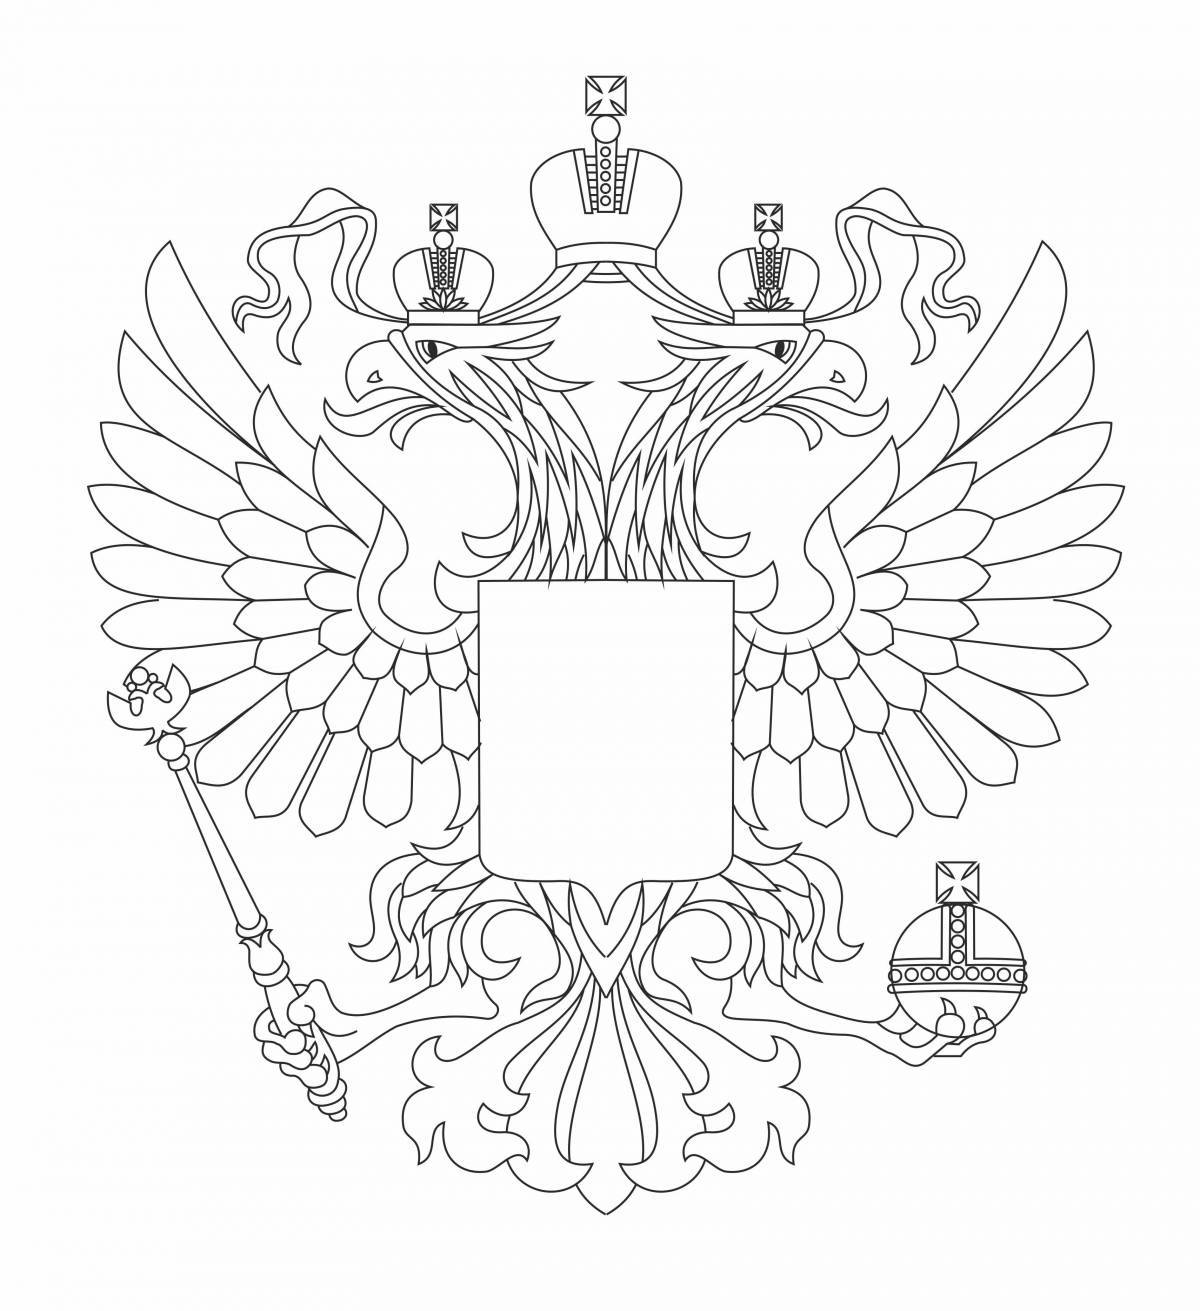 Coat of arms of Russia #14